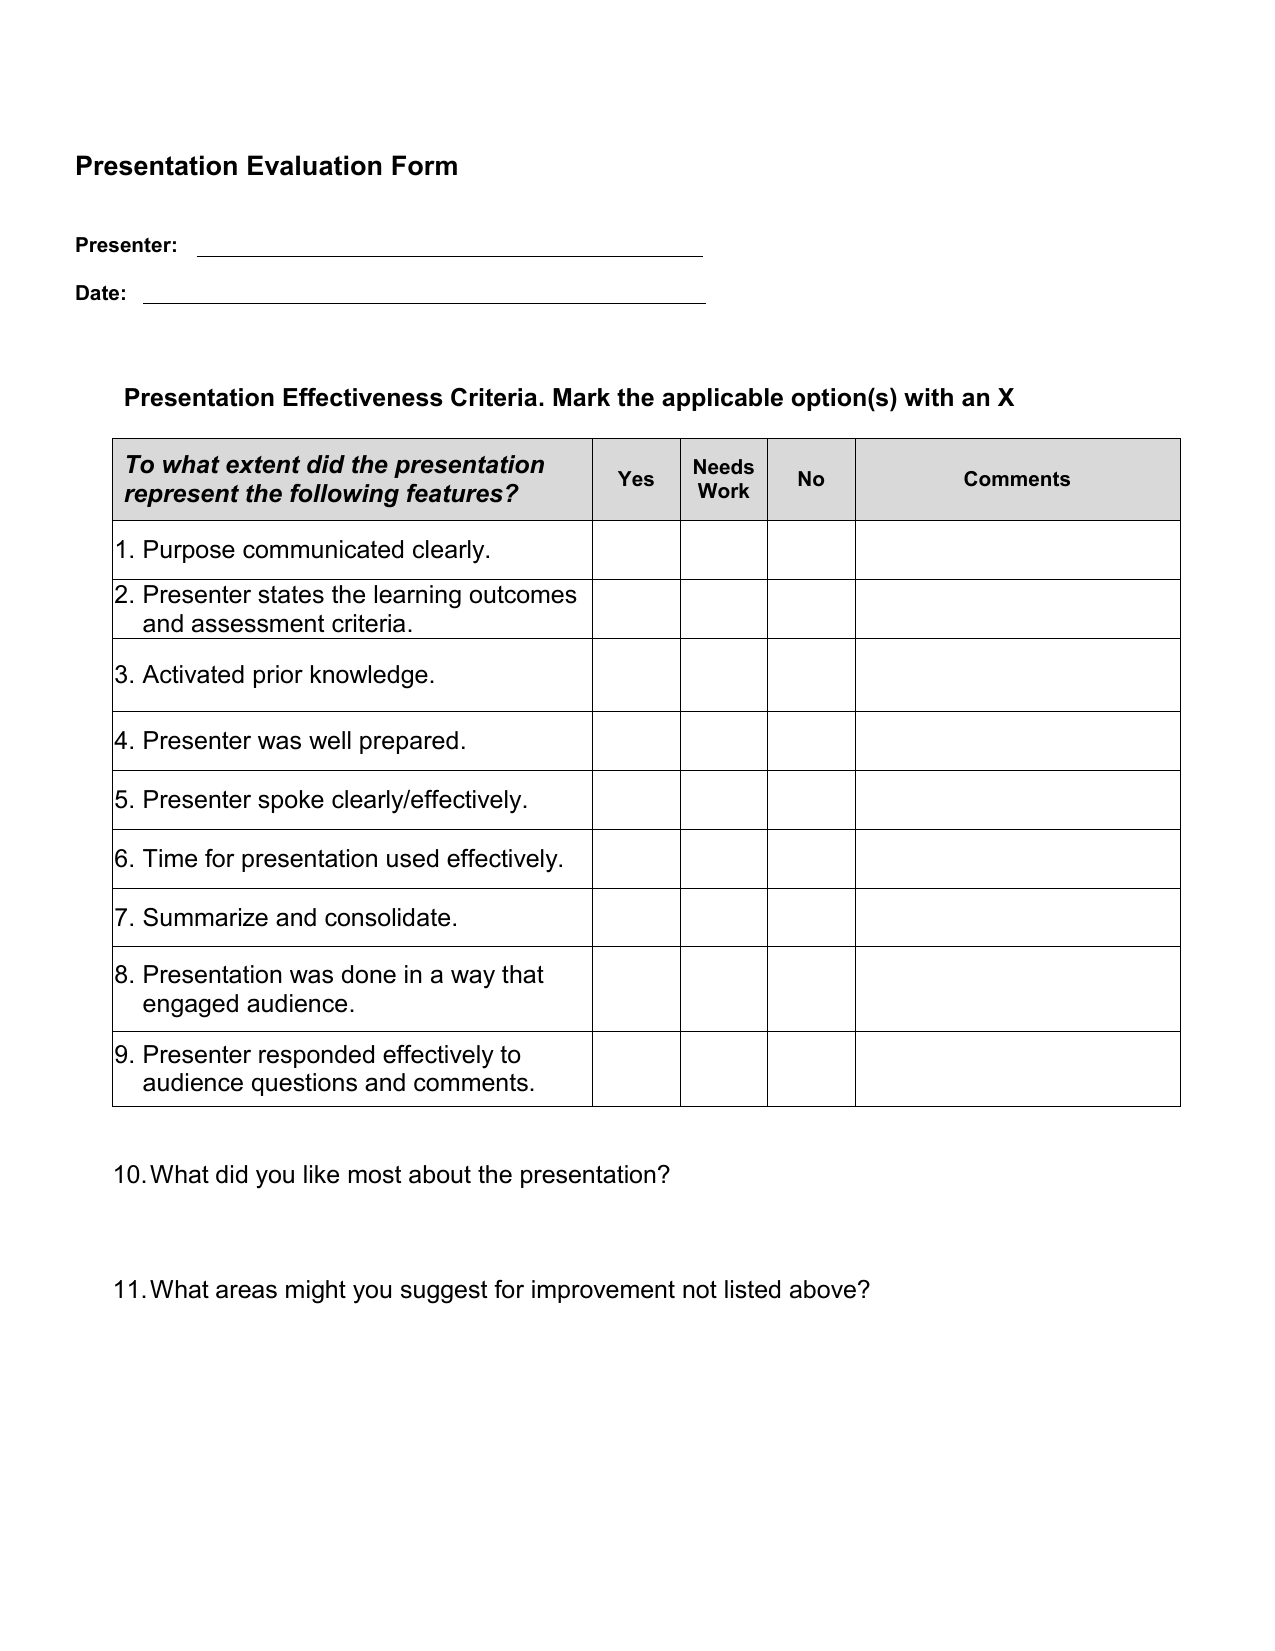 Presentation Evaluation Form Fill Out Sign Online And - vrogue.co